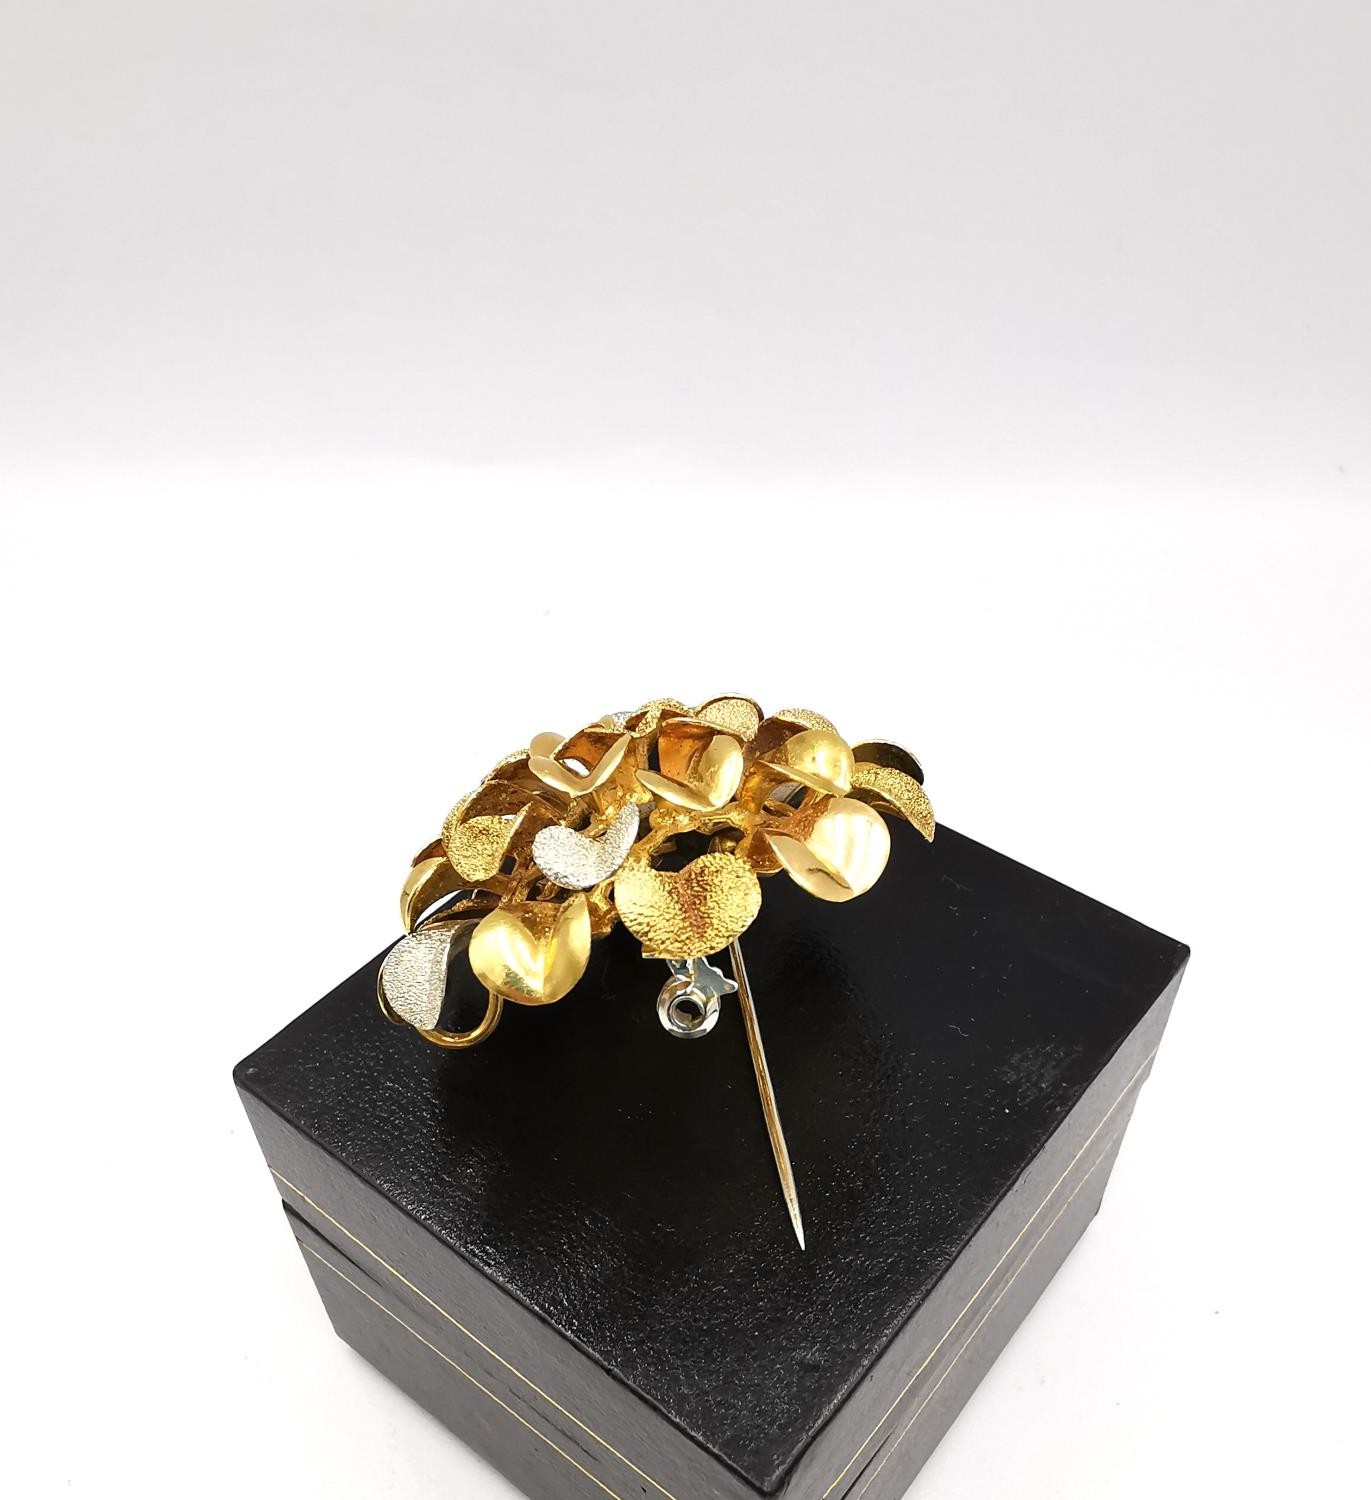 An Italian 18ct tri-colour gold stylised marigold brooch/pendant with texture to some of the petals. - Image 8 of 9